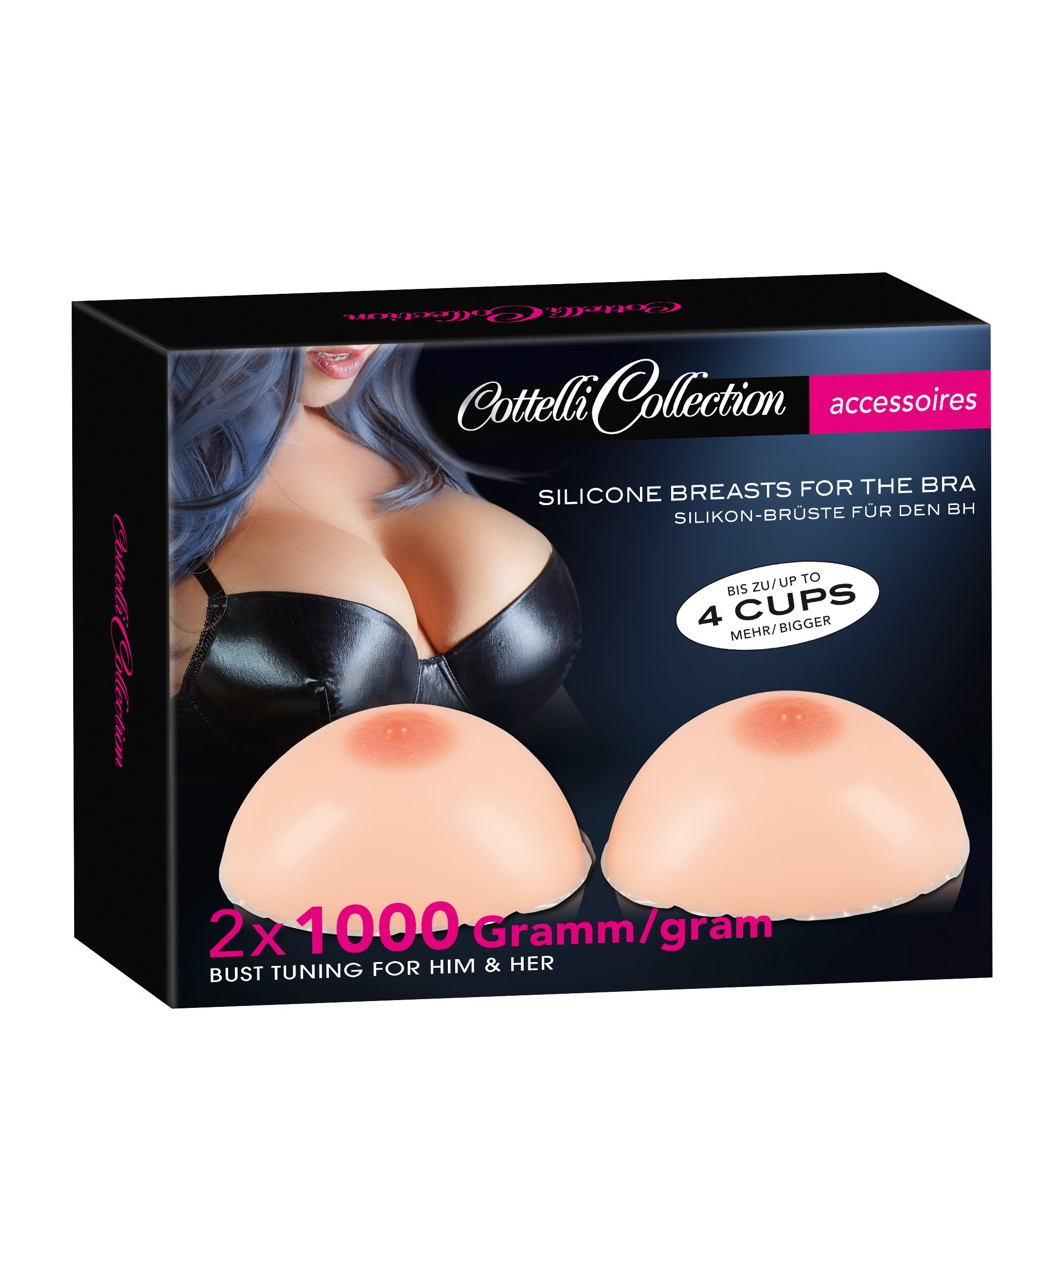 Cottelli Lingerie silicone breast forms